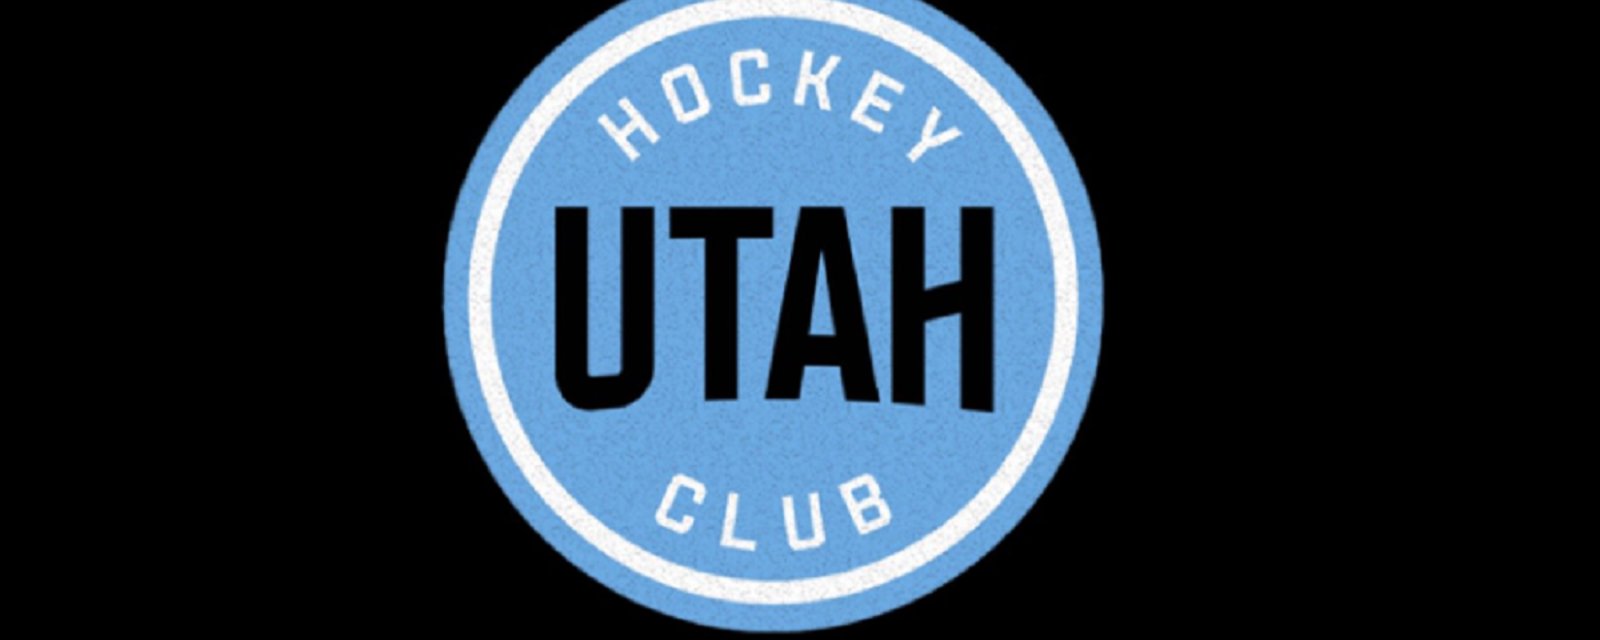 Utah officially cuts ties with 3 of their players.